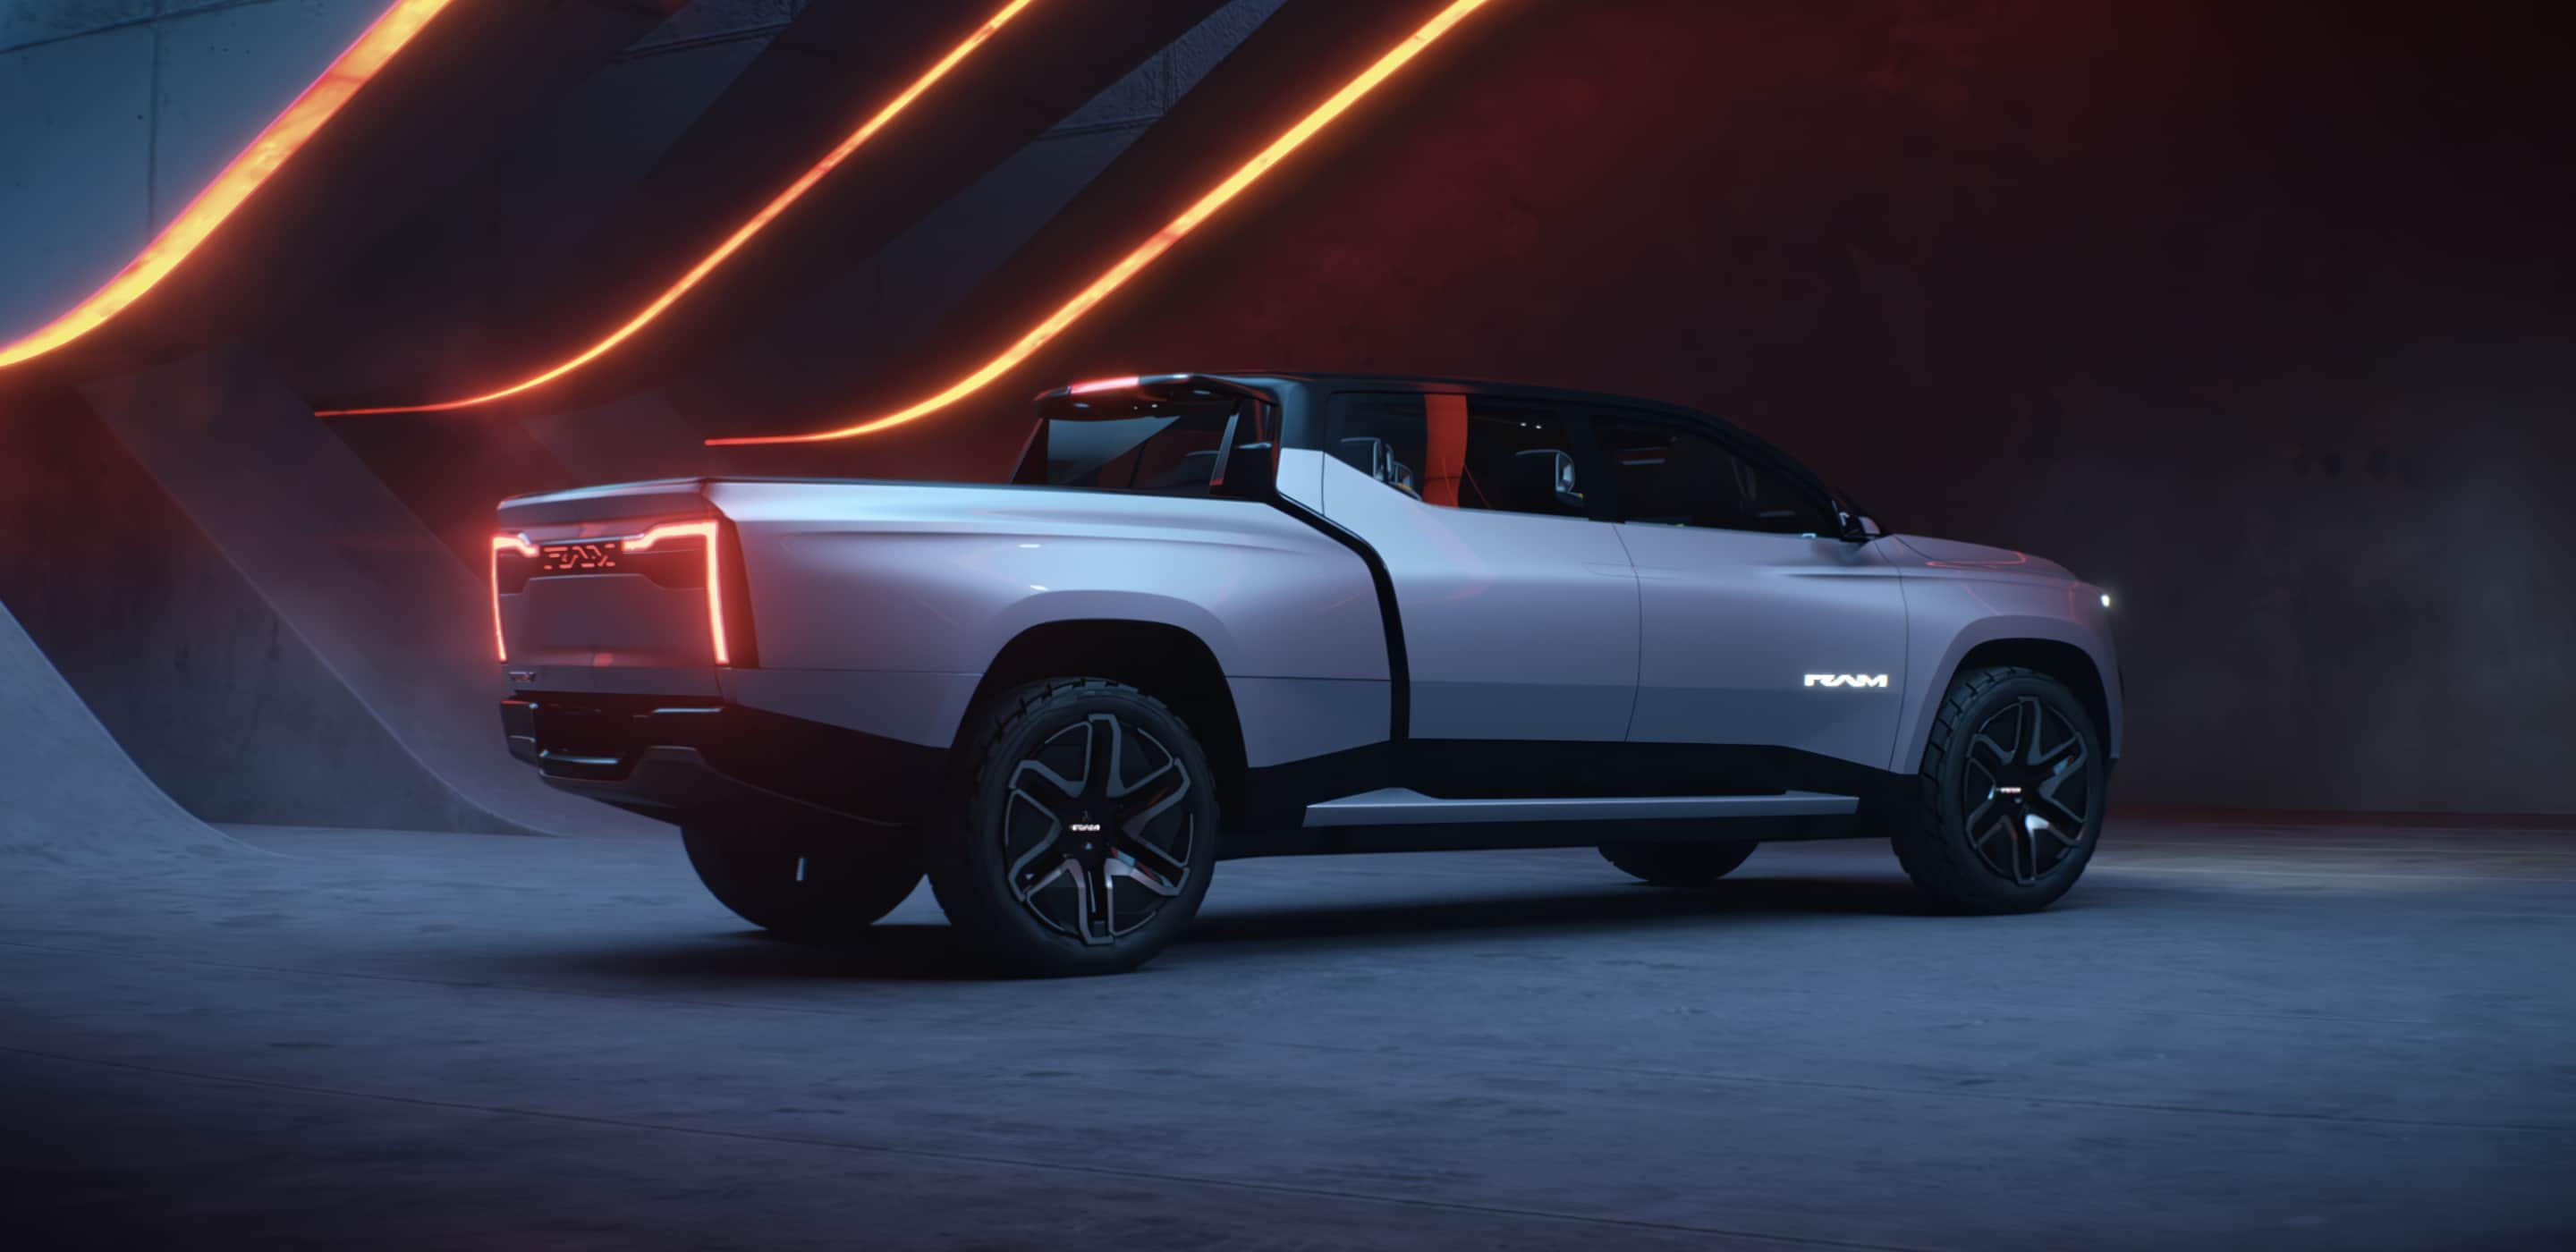 Display An angled passenger-side profile of the Ram Revolution Concept in a studio with a dramatic set design.